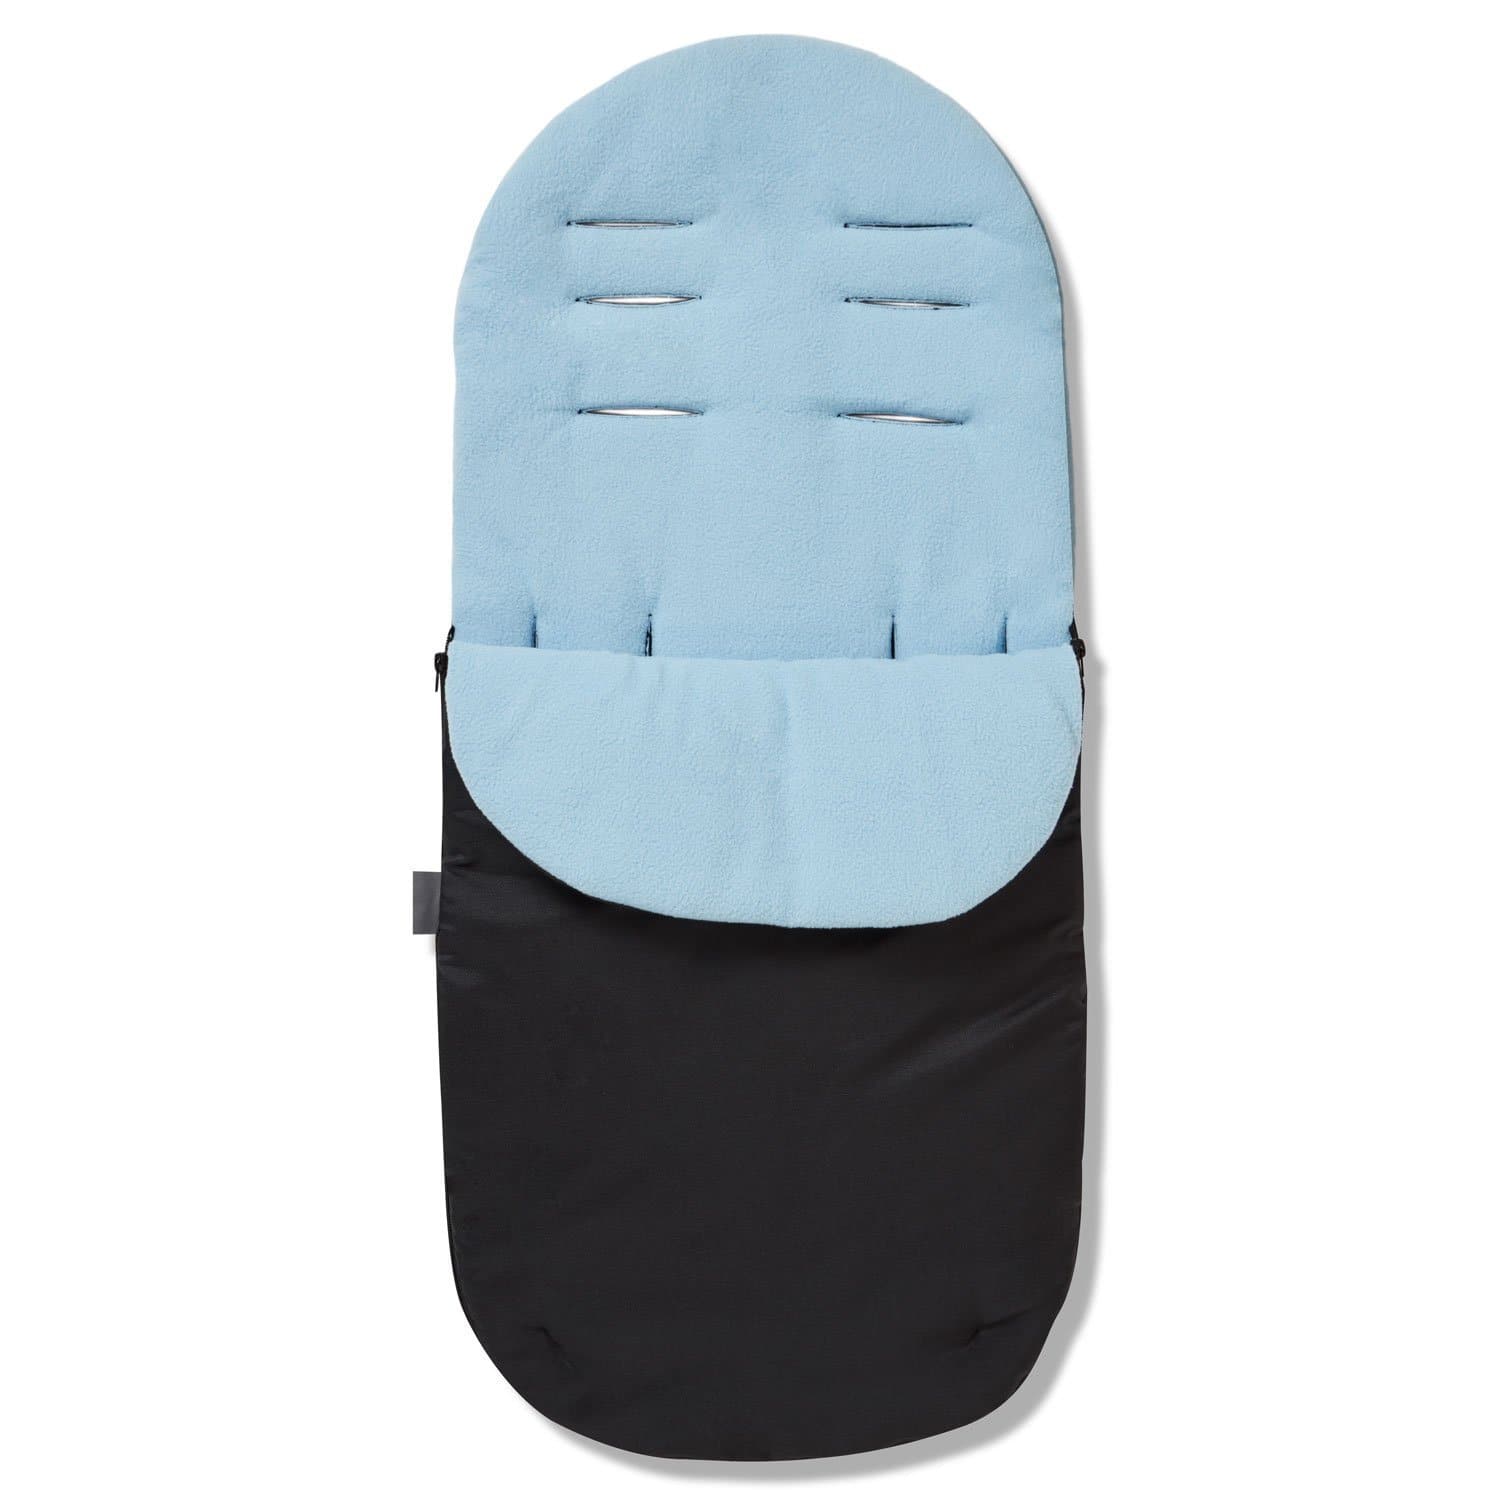 Footmuff / Cosy Toes Compatible with Hesba - For Your Little One